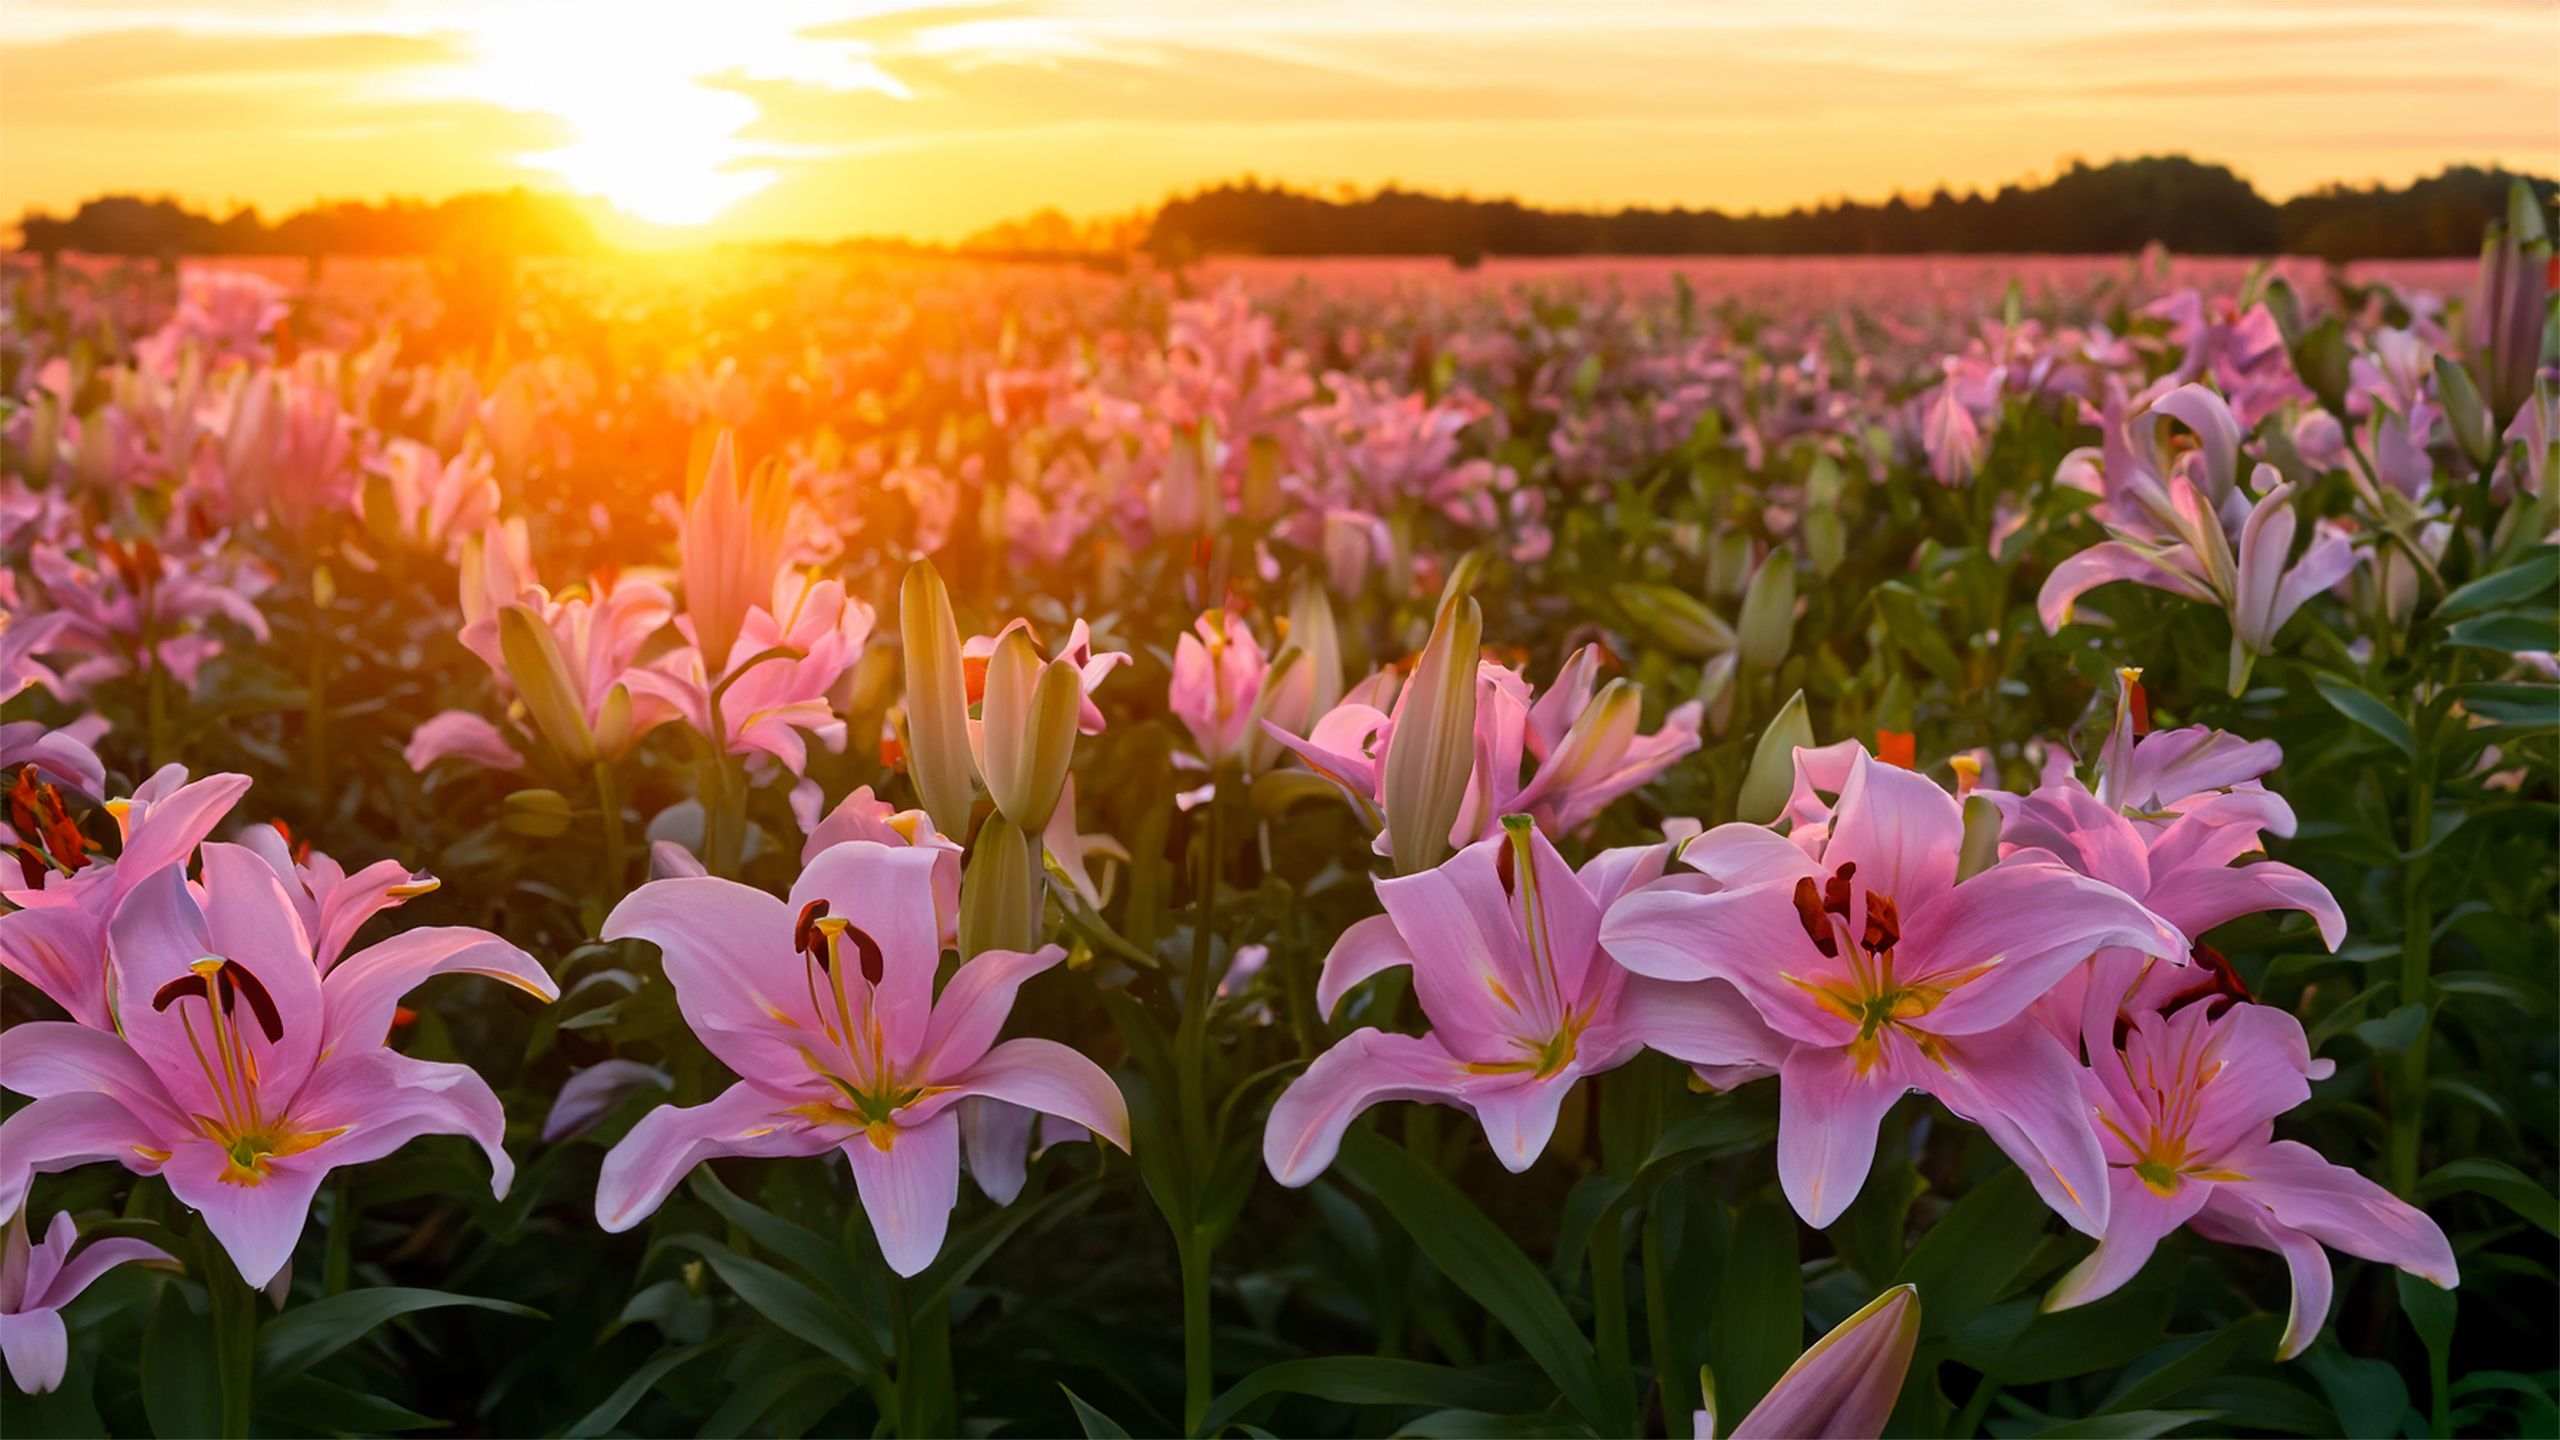 A field of lilies at sunset